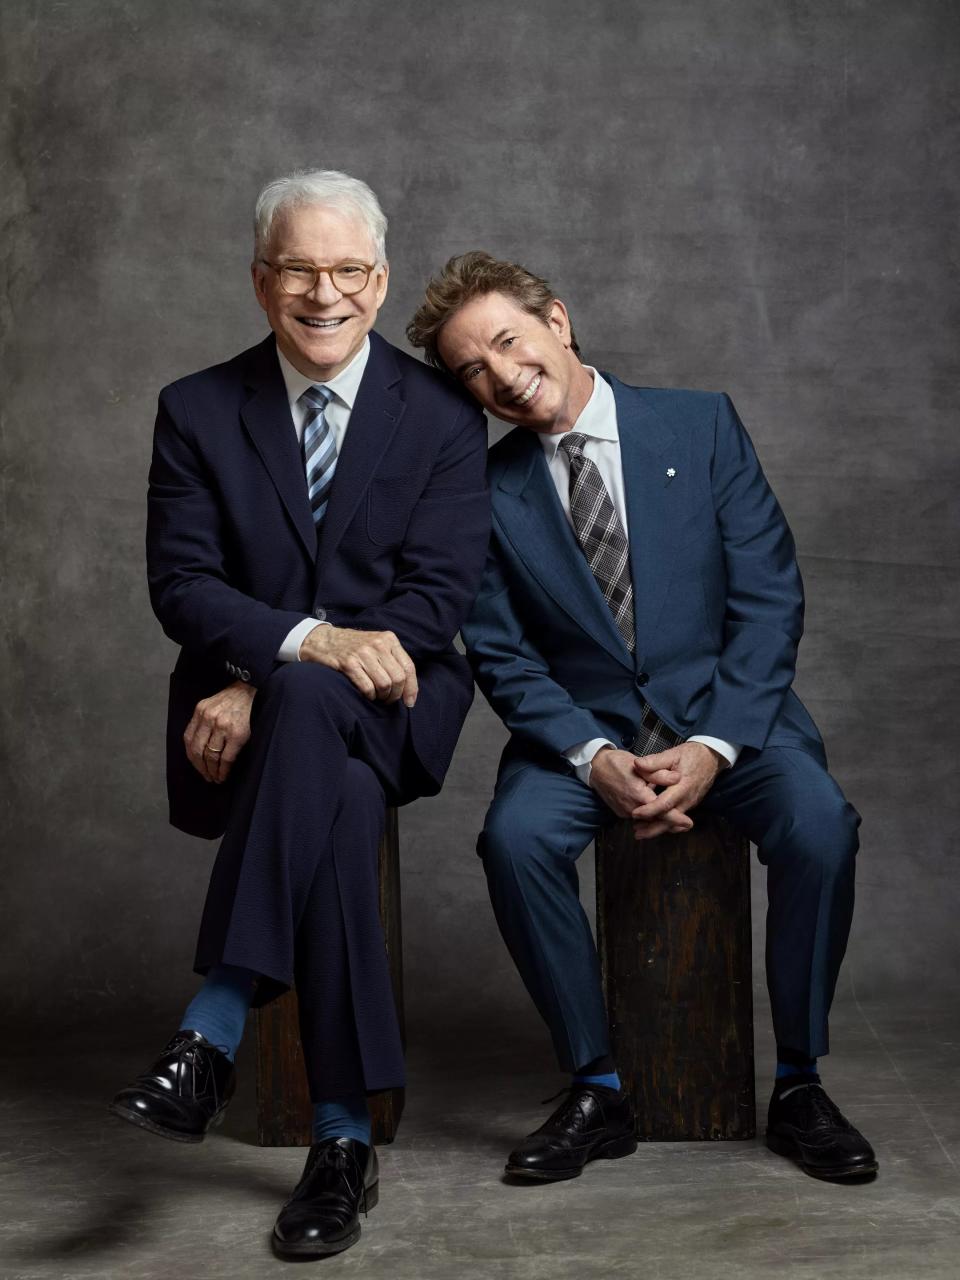 Steve Martin, left, and Martin Short, stars of Hulu's "Only Murders in the Building," will share an evening of live comedy at Providence Performing Arts Center on Nov. 11.